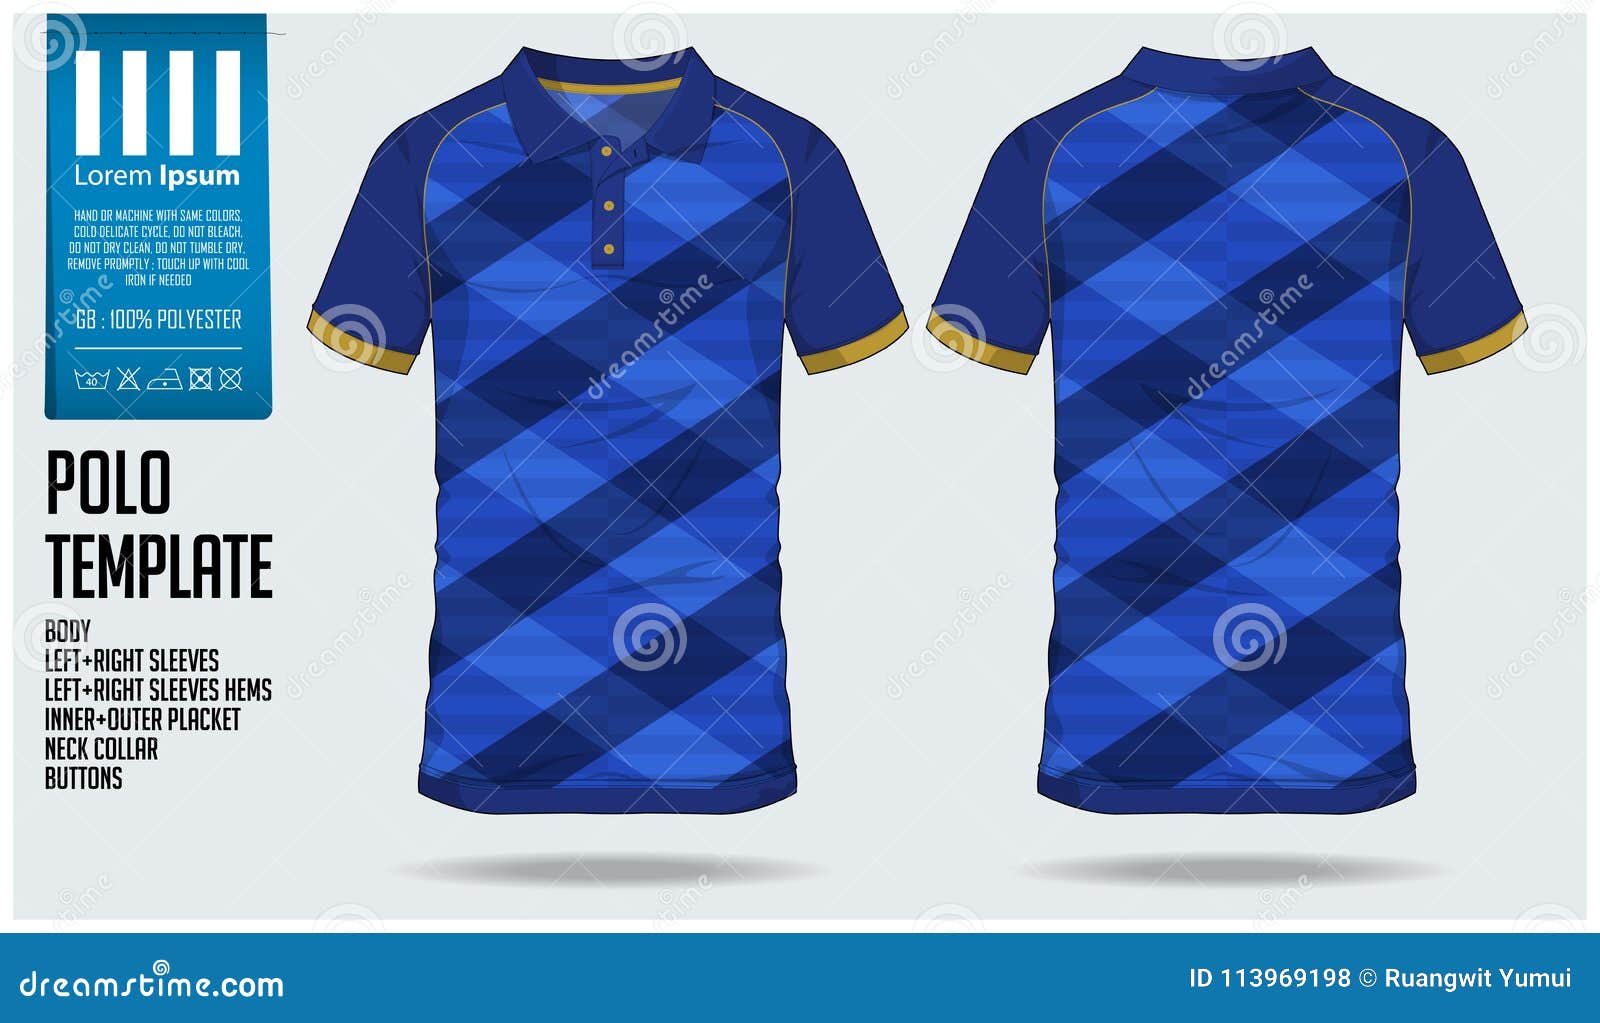 Download Polo T Shirt Sport Design Template For Soccer Jersey ...